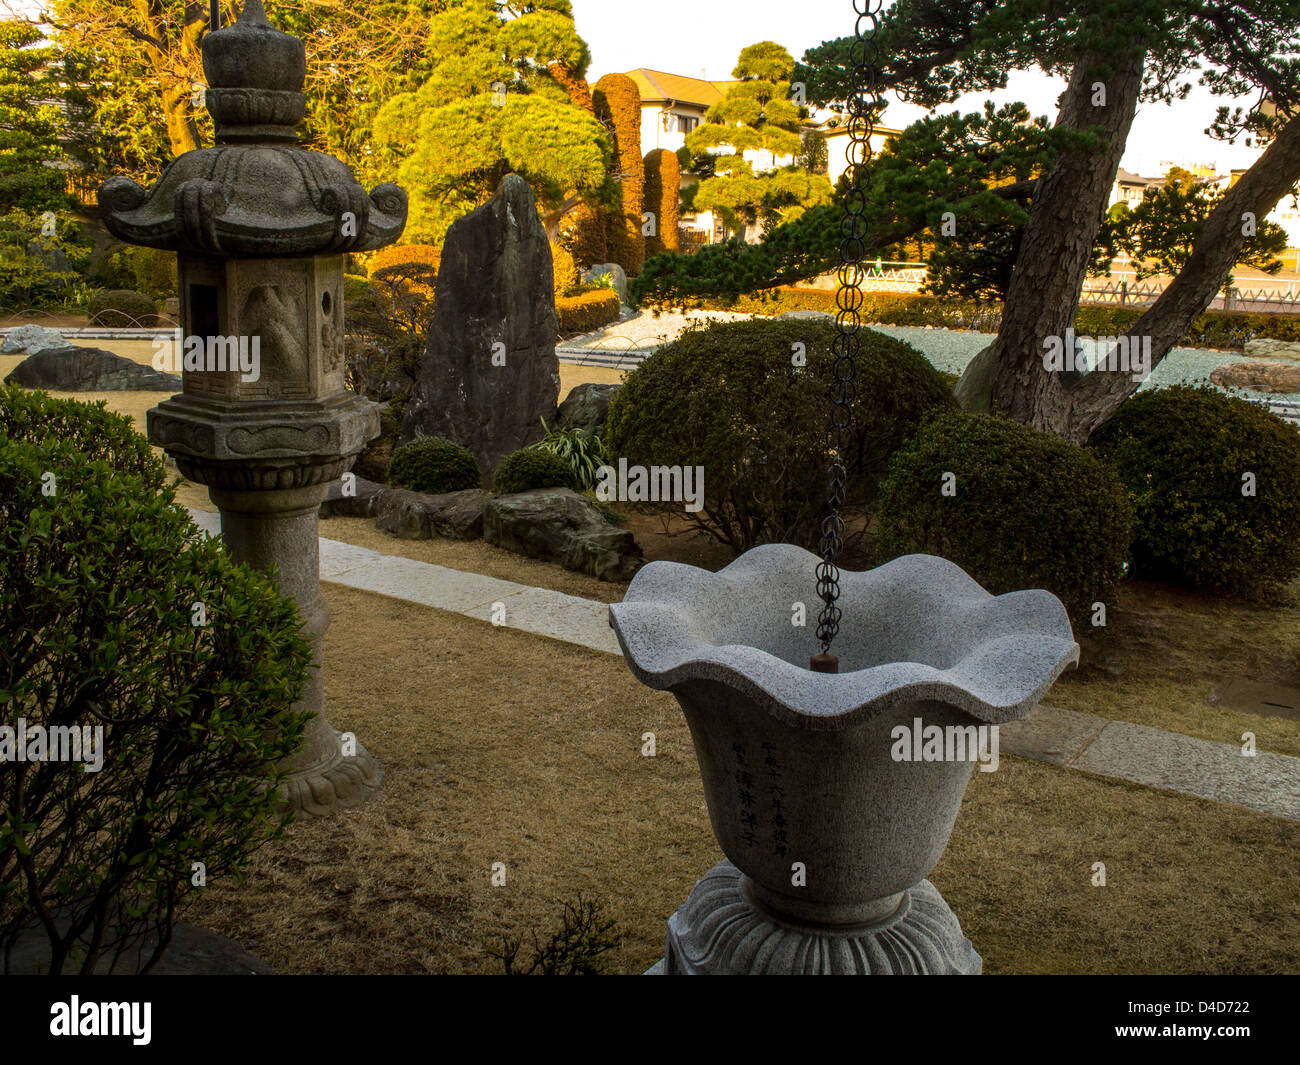 A stone lantern and rain water cistern with late afternoon sunshine on the trees beyond,  in a Japanese temple garden. Stock Photo